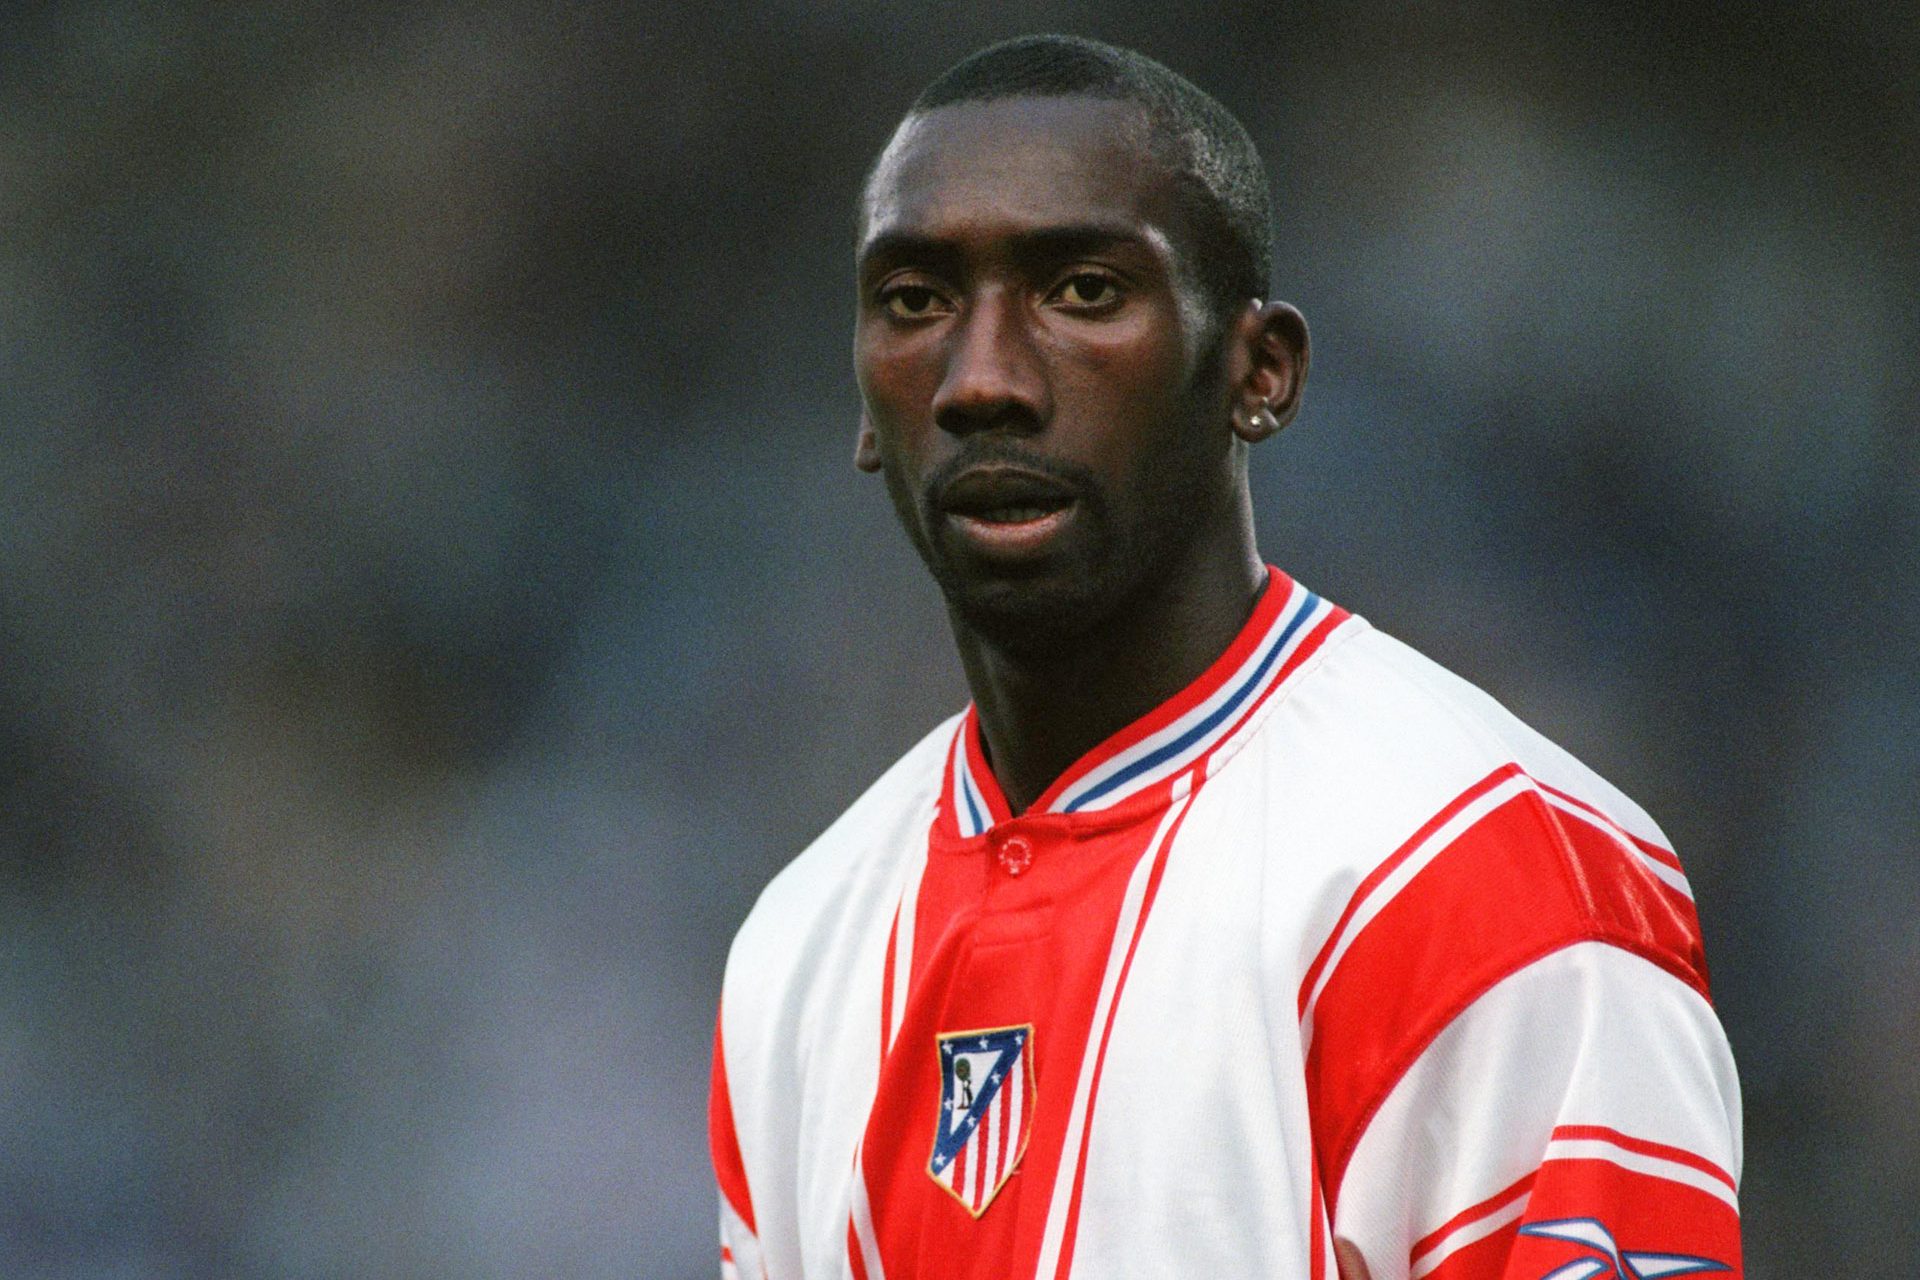 Jimmy Floyd Hasselbaink - Atlético Madrid and Chelsea legend